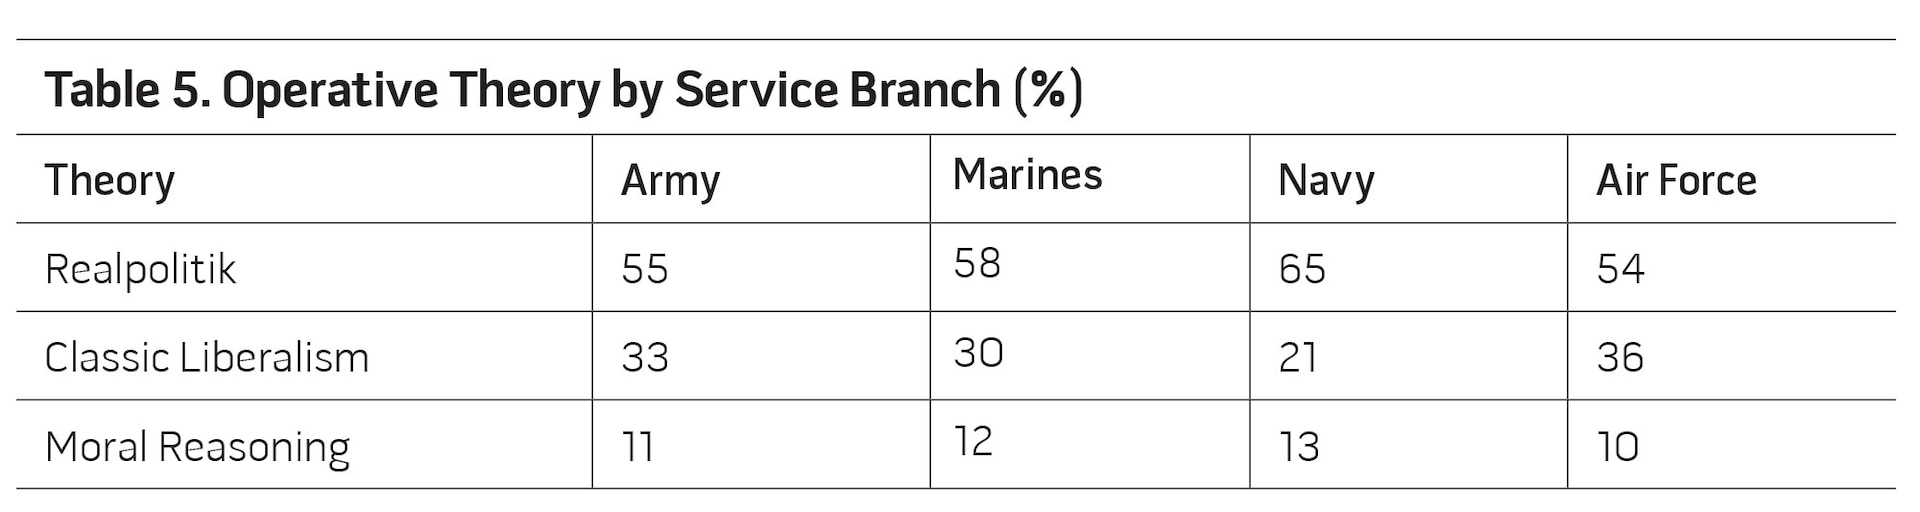 Table 5. Operative Theory by Service Branch